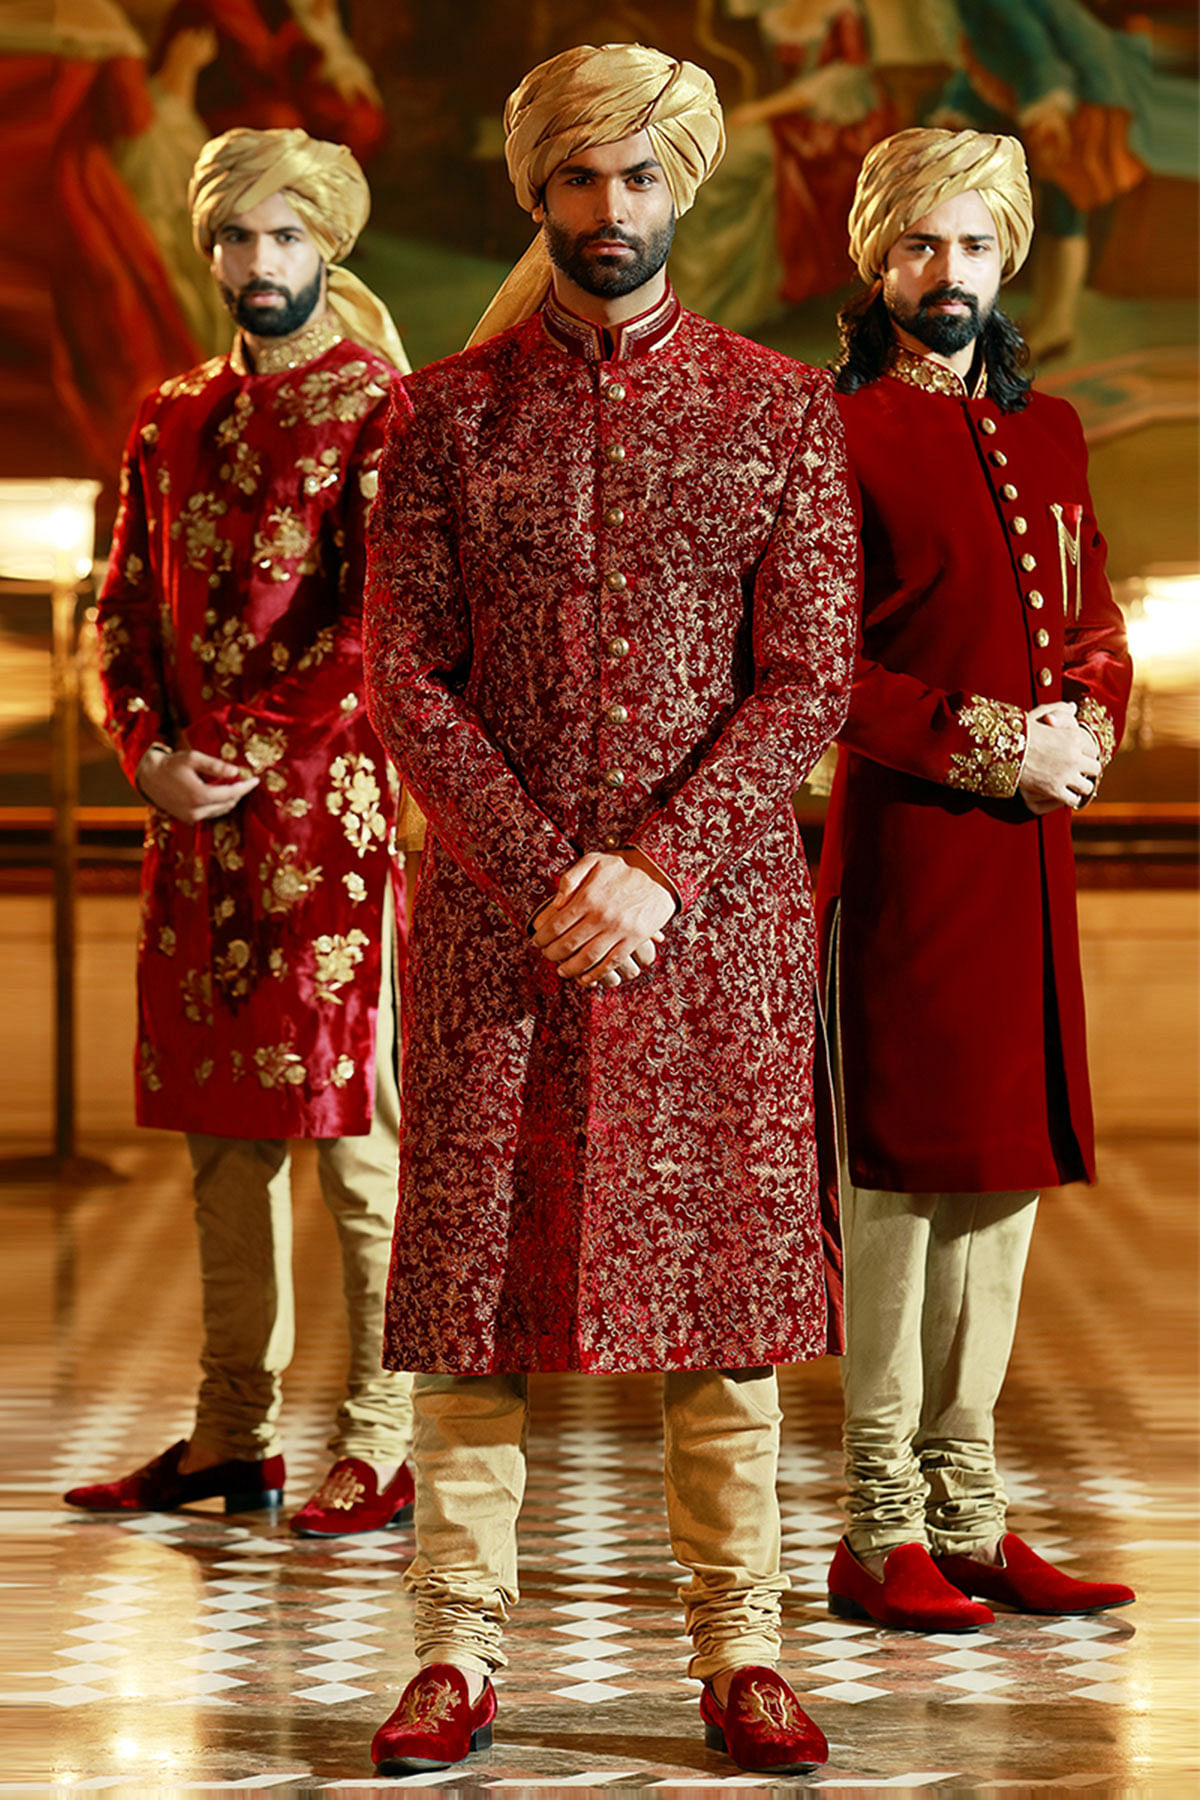 A Guide On 10 Of The Best Sherwani Designs For Wedding SZN | LBB